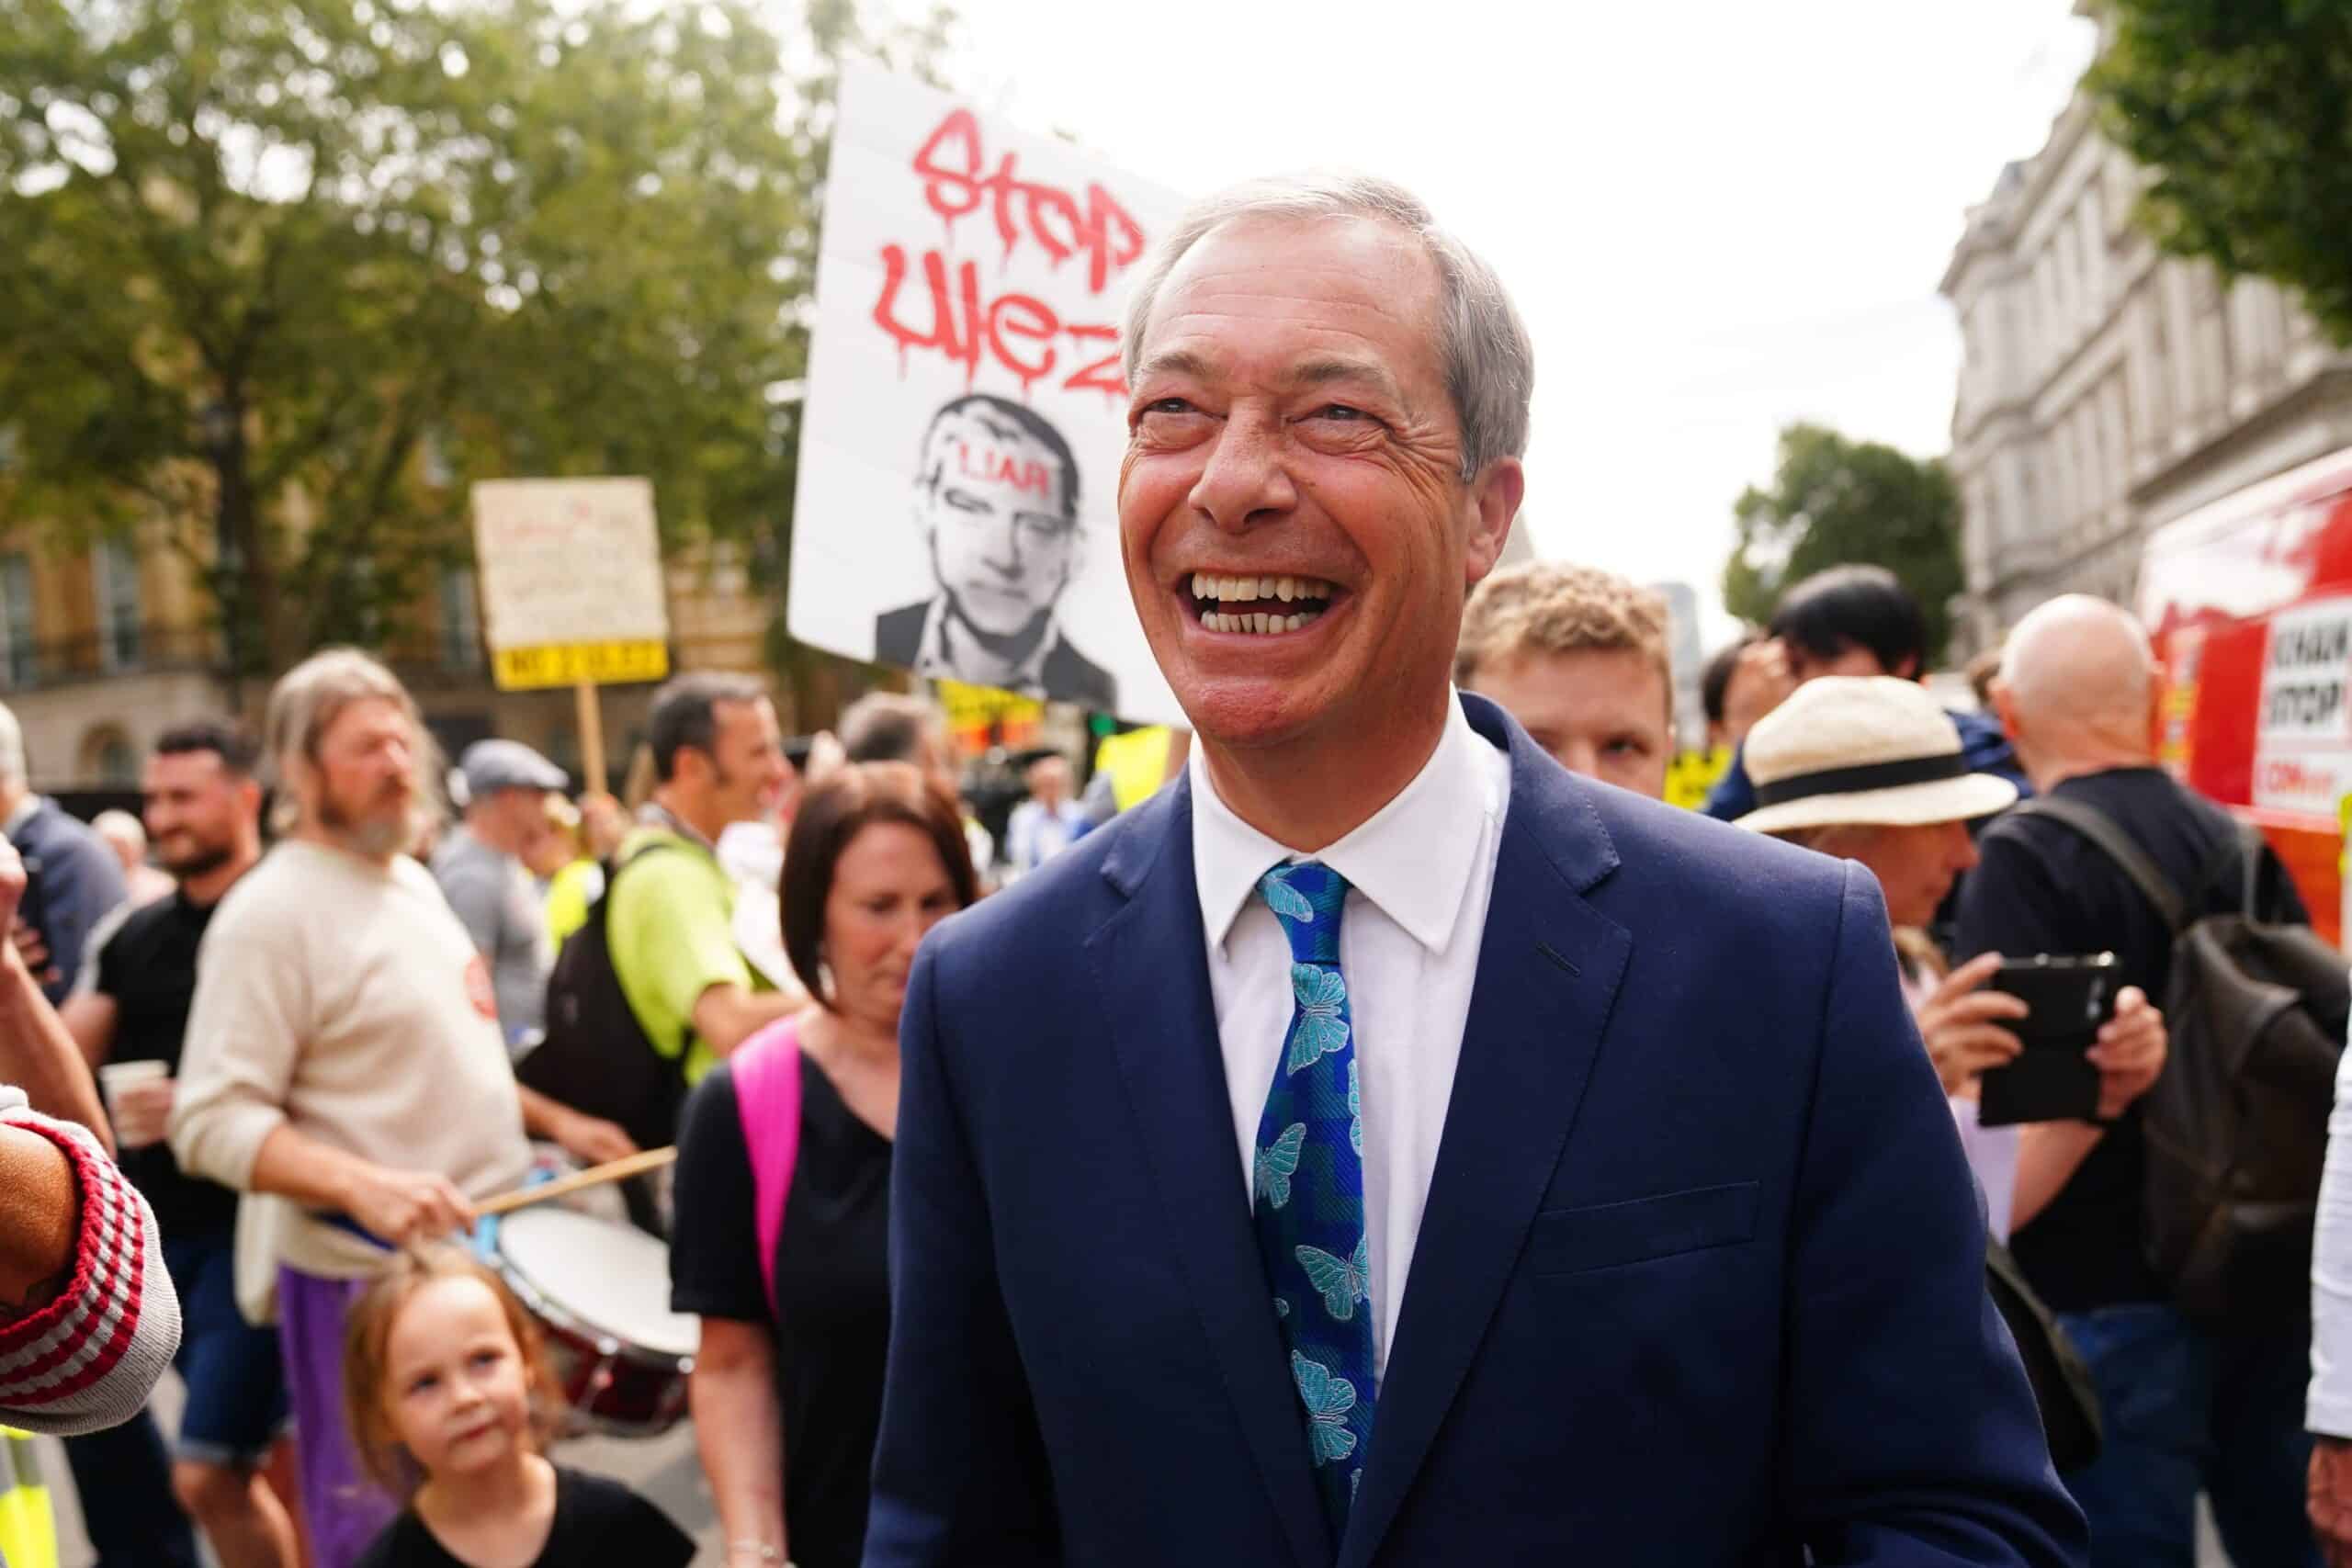 Nigel Farage rejects suggestions he could make Tory party return